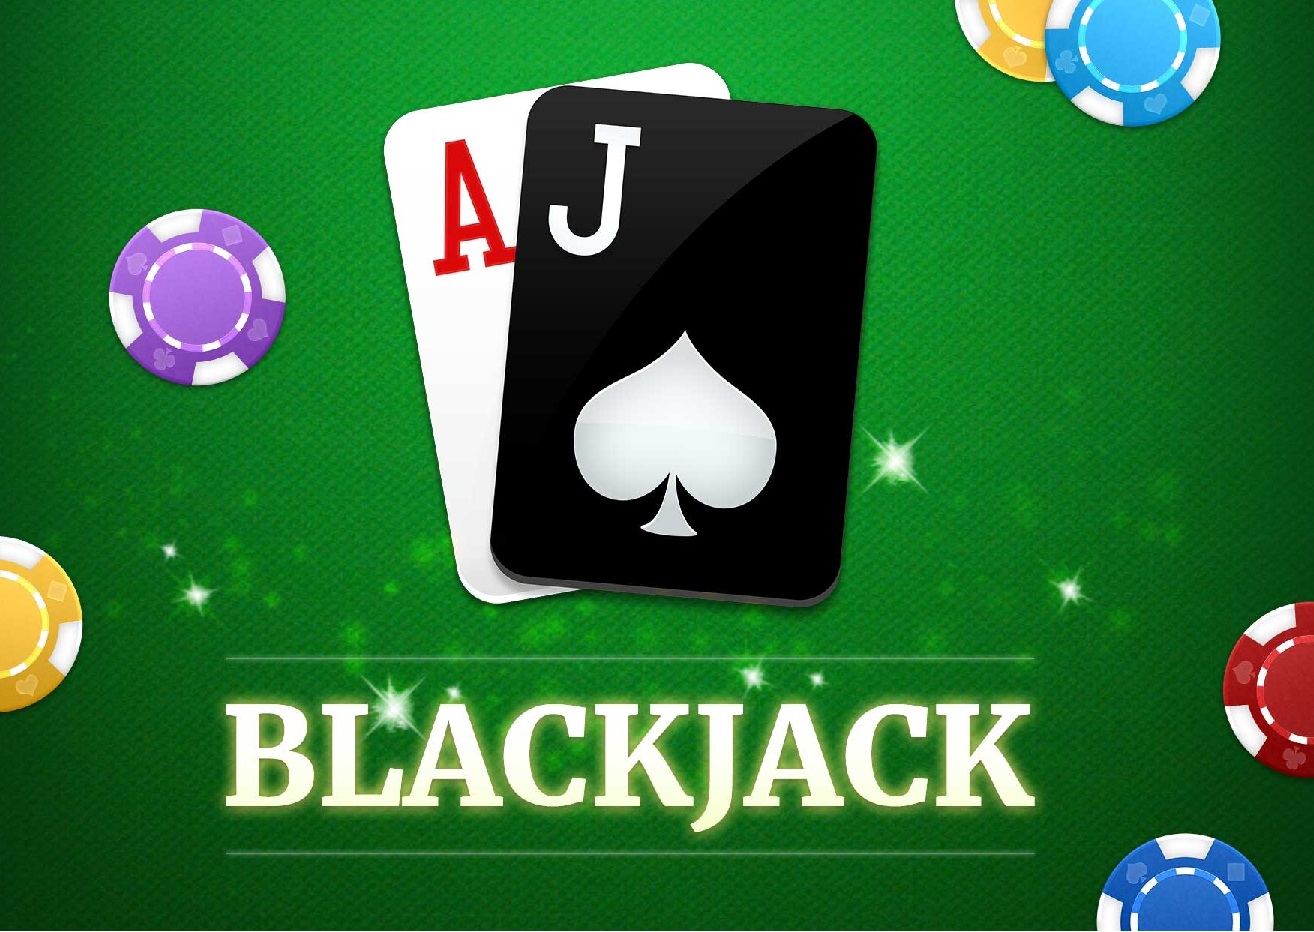 what are the rules for betting at blackjack sites